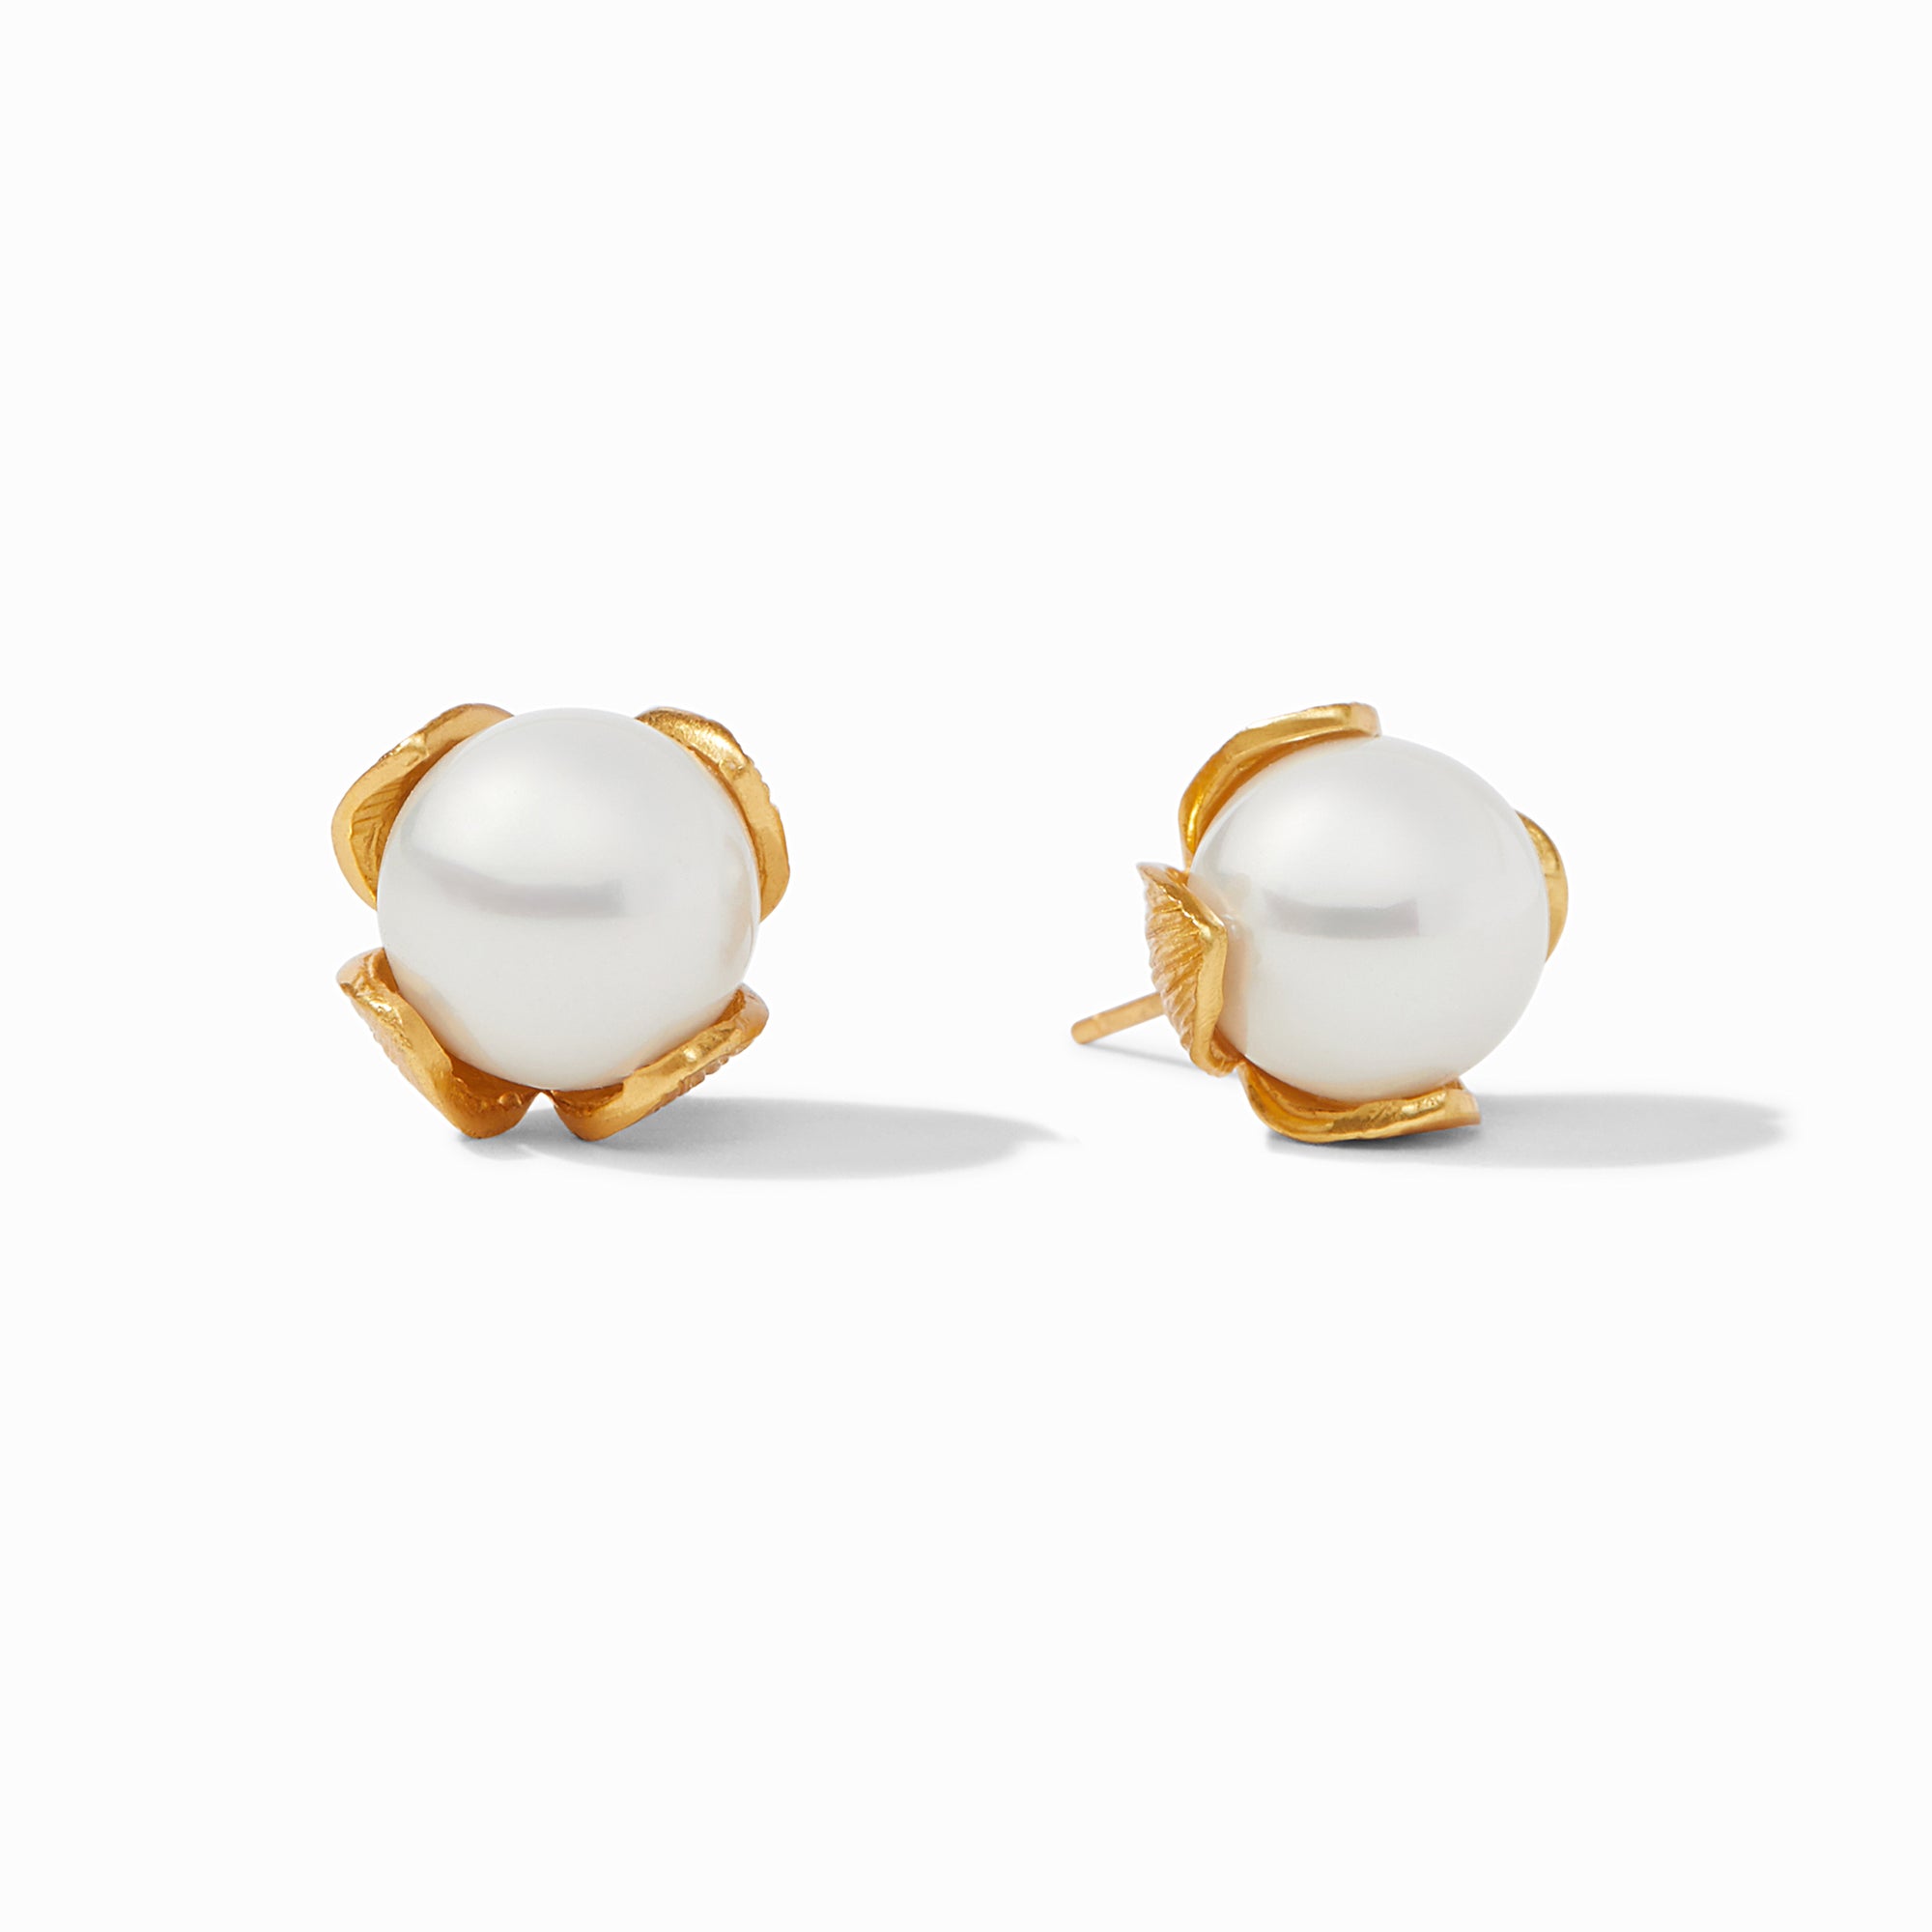 Penelope pearl stud in size large